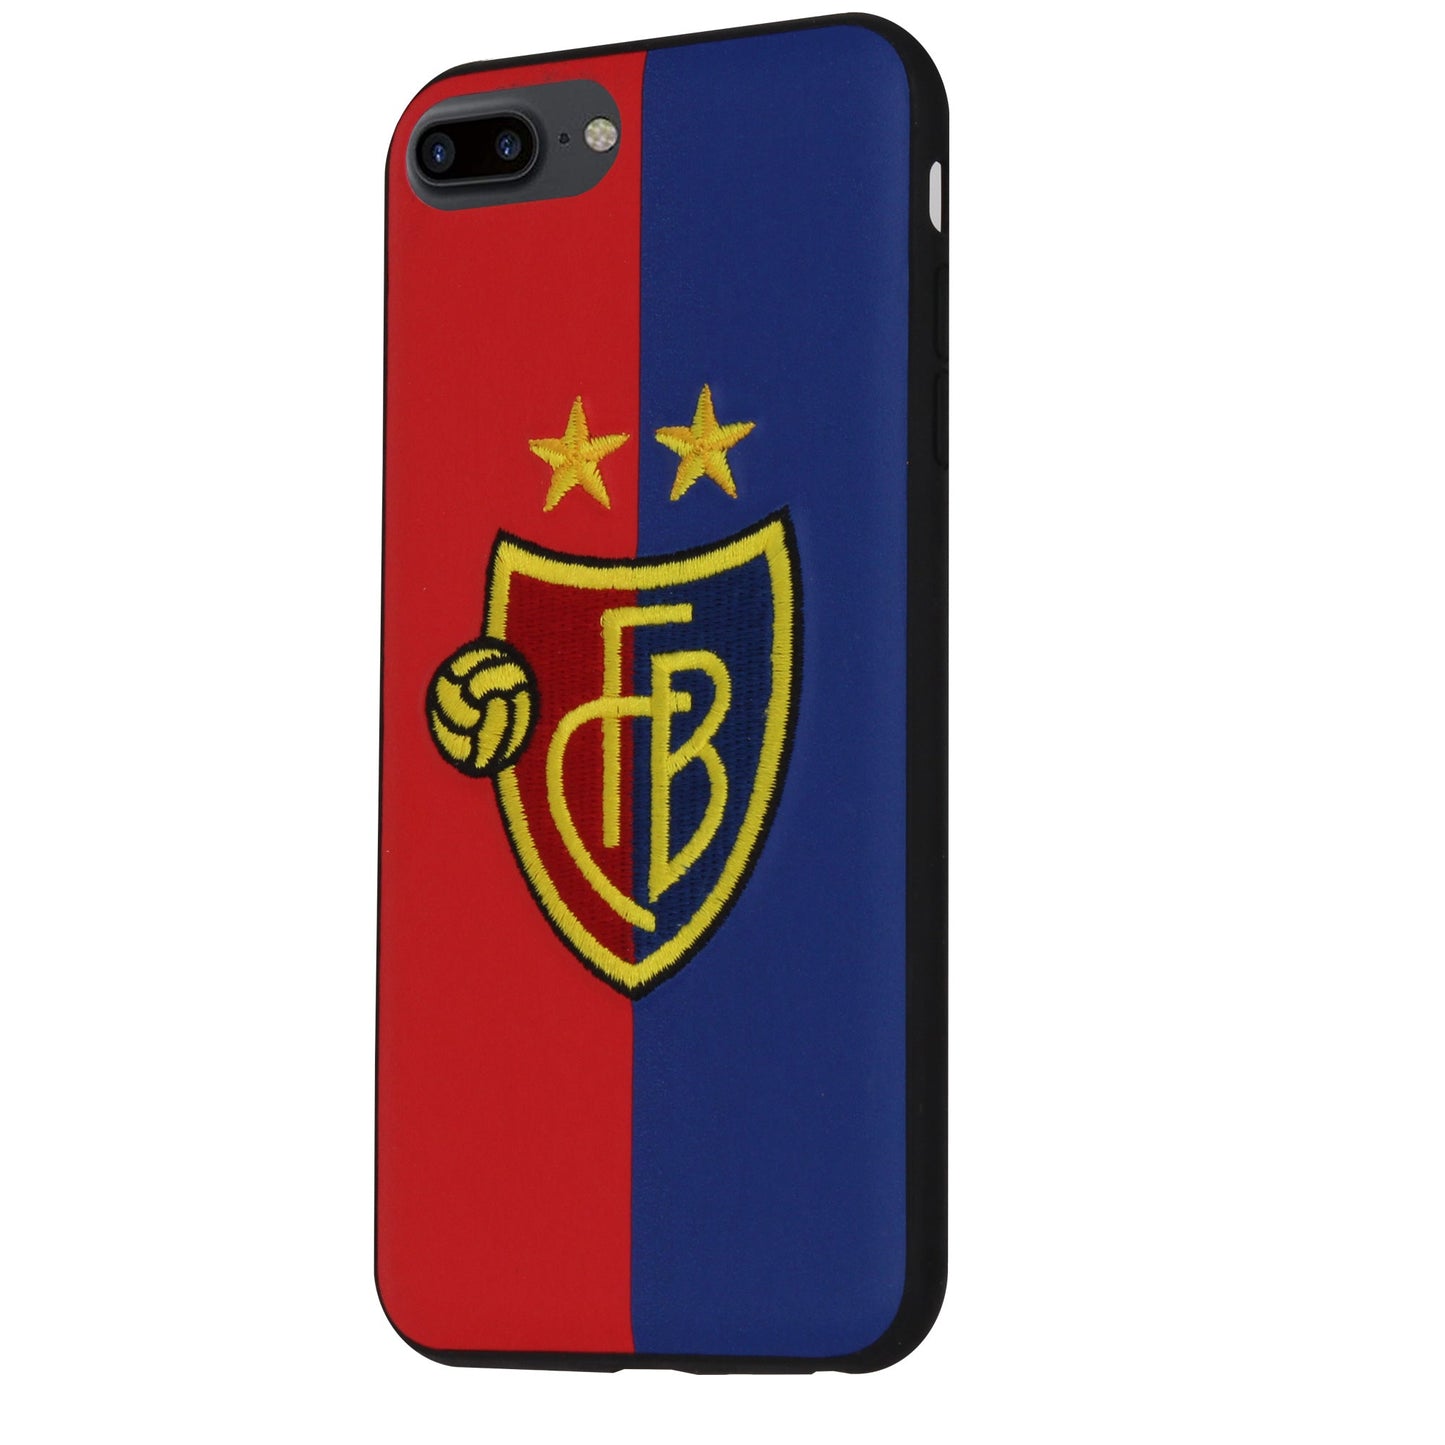 FCB Red/Blue Stitch Case for iPhone 6/6S/7/8 Plus